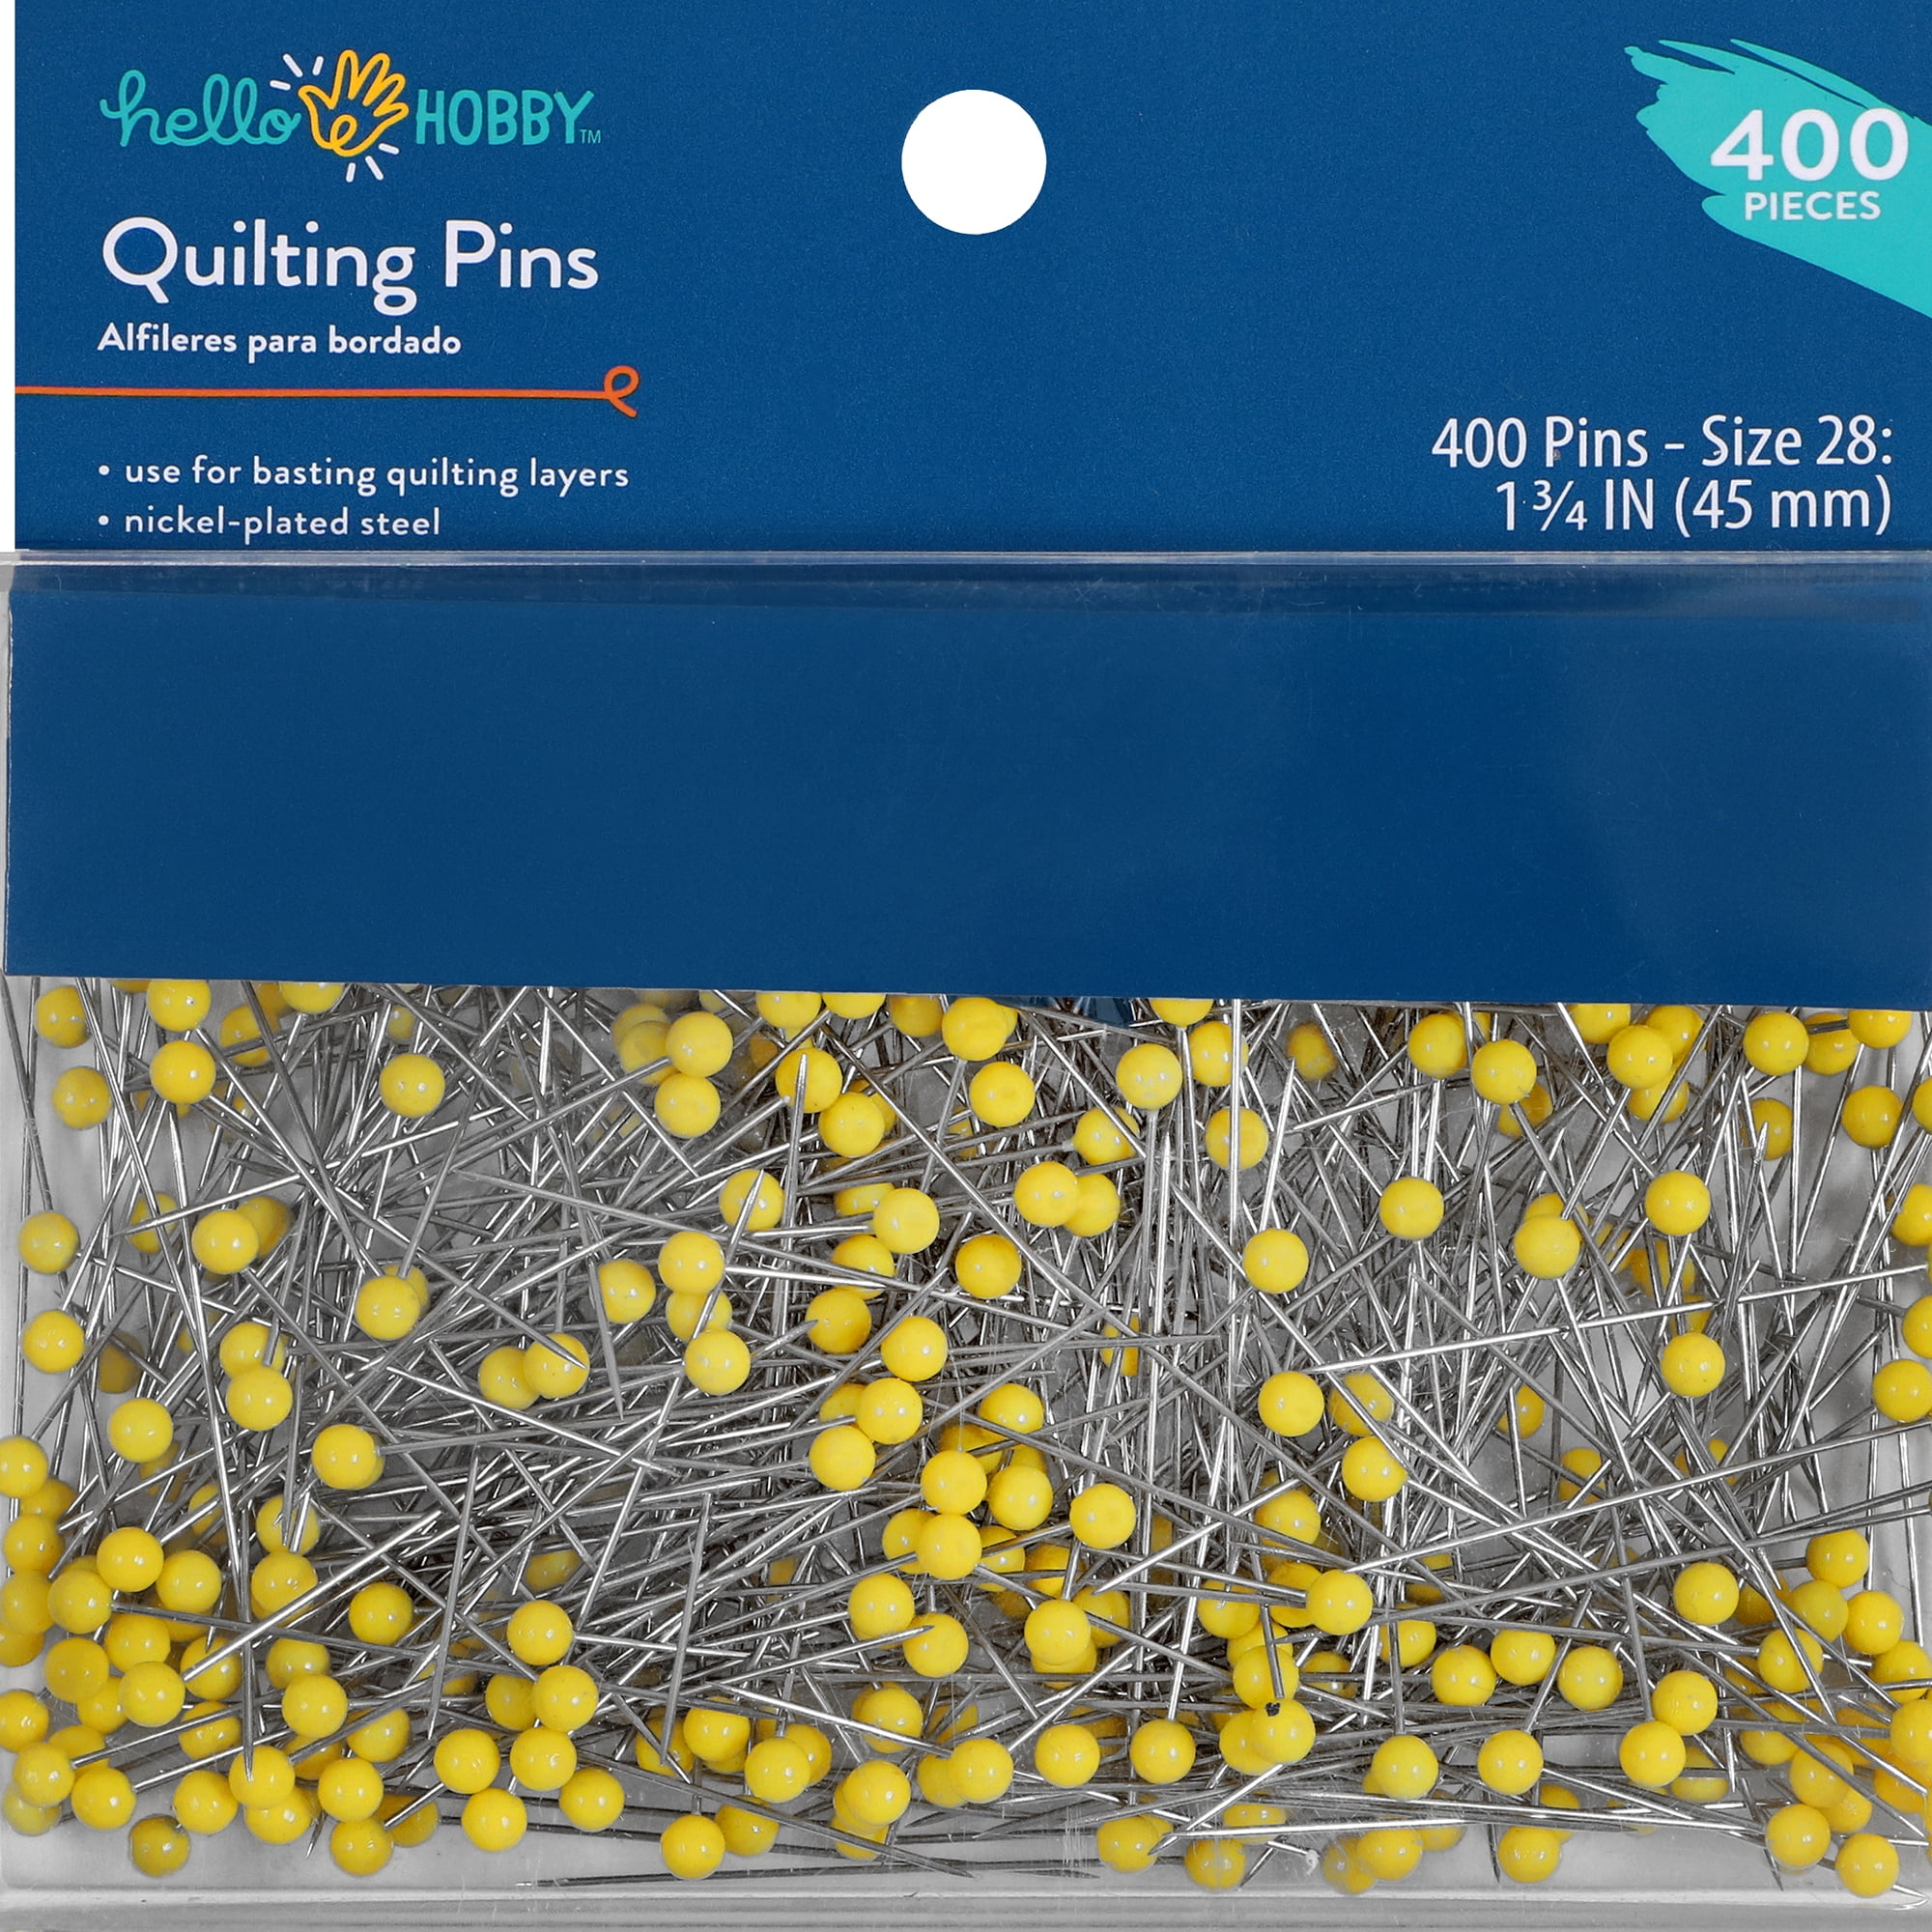 Popular Compatible with Rational Hello Hobby Quilting Pins, Size 28, 400 Count - Walmart.com